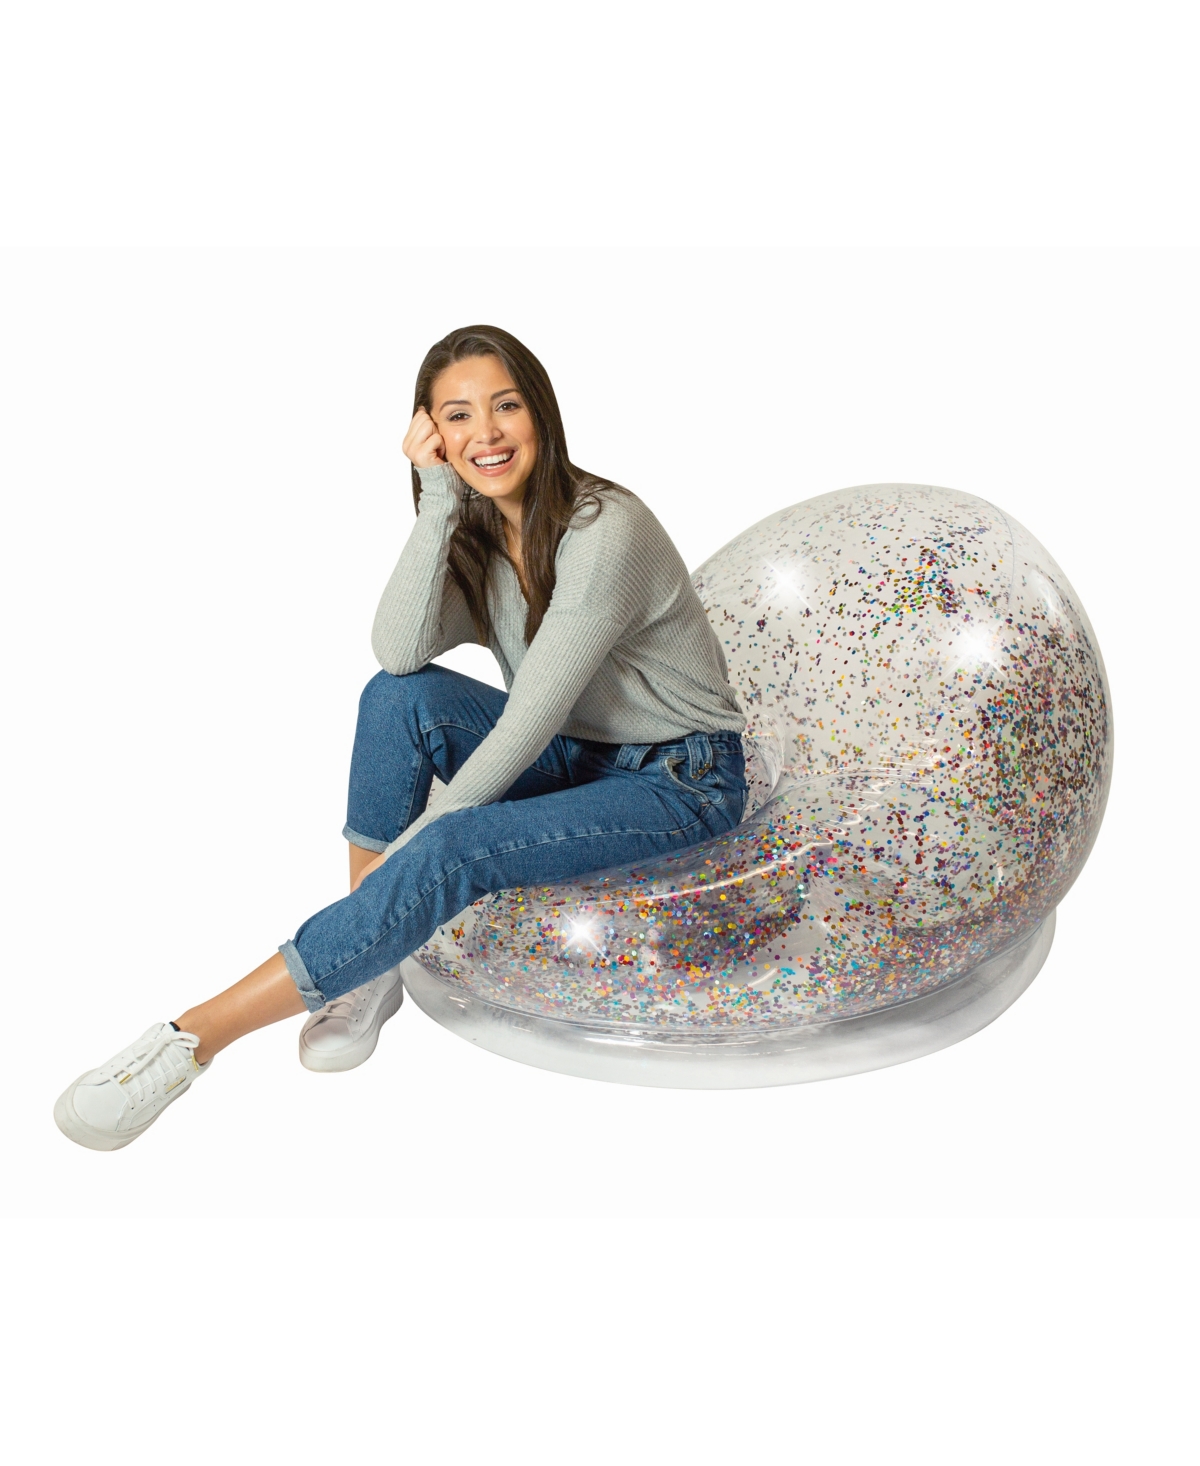 PoolCandy's AirCandy Glitter City Chair